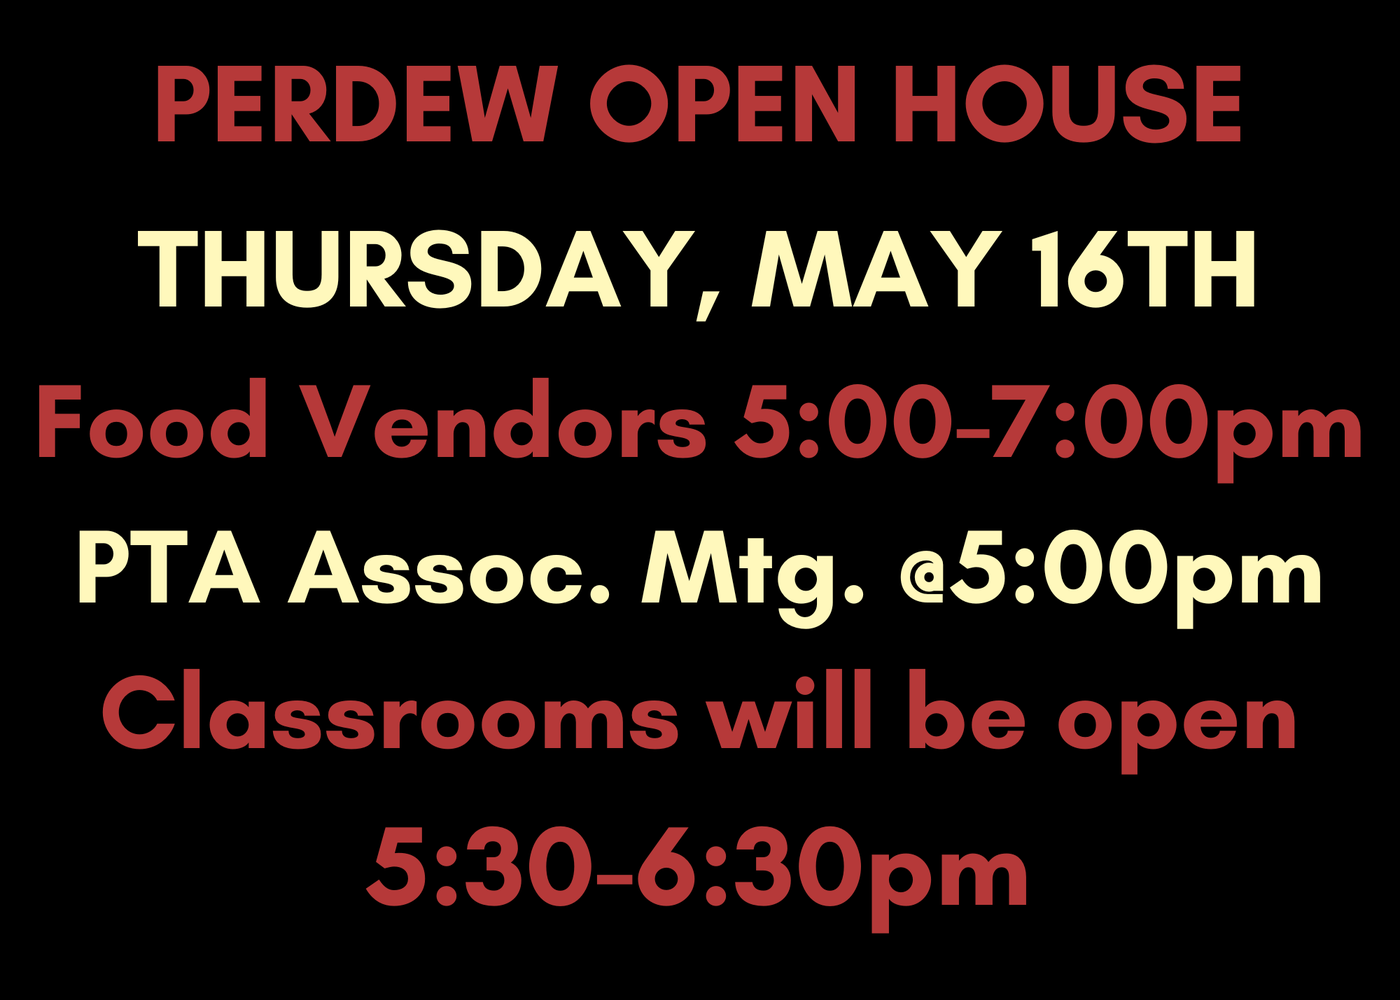 Open House Information